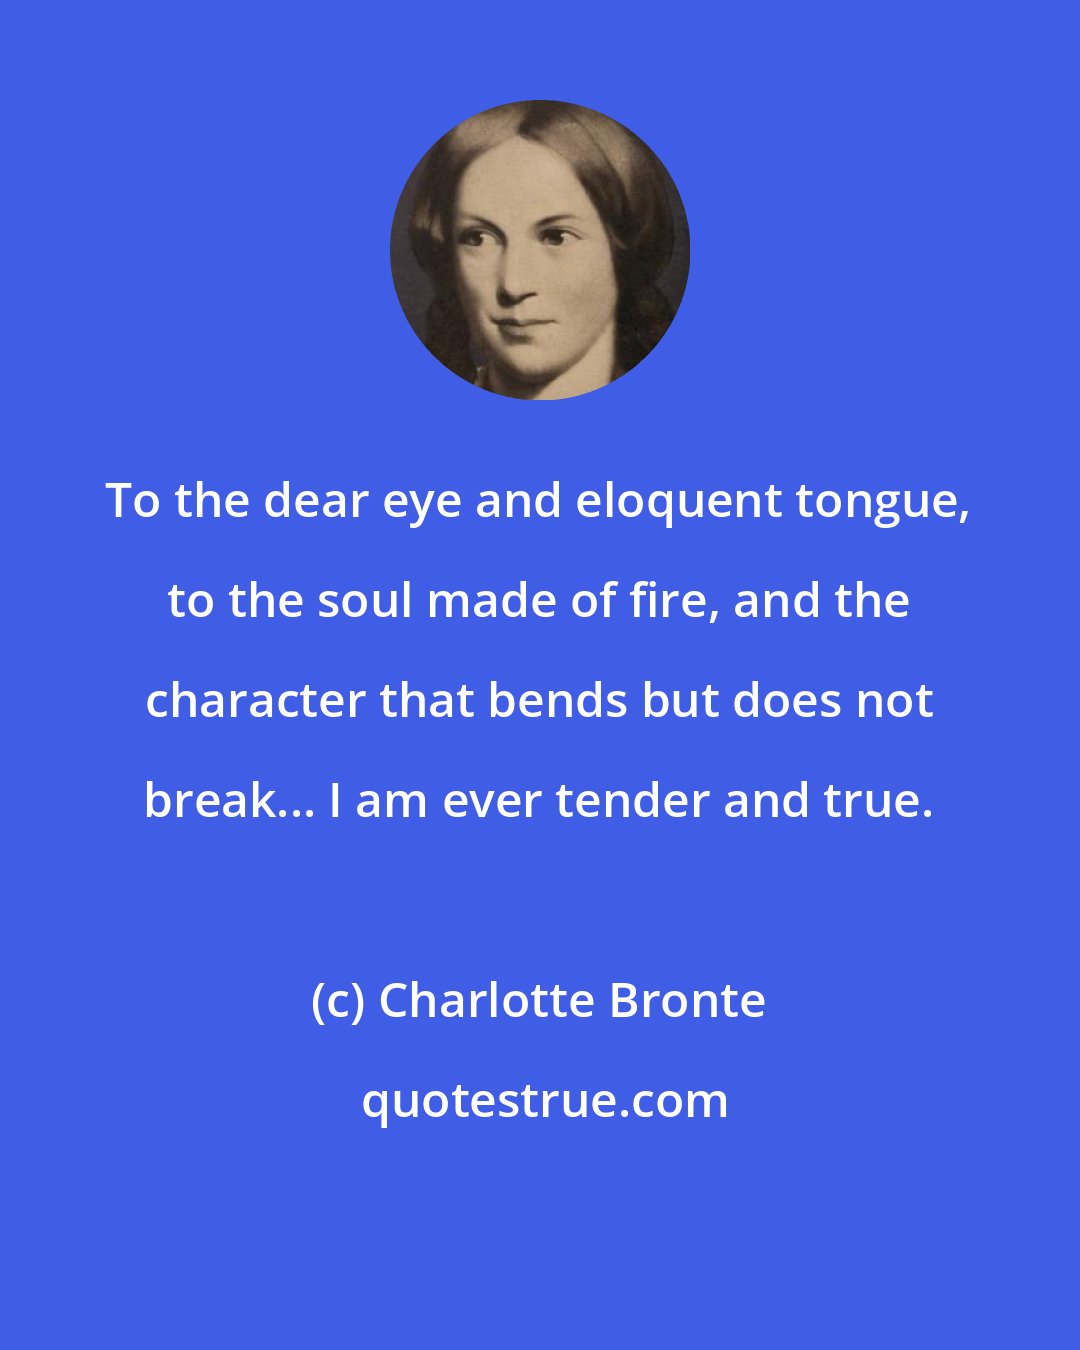 Charlotte Bronte: To the dear eye and eloquent tongue, to the soul made of fire, and the character that bends but does not break... I am ever tender and true.